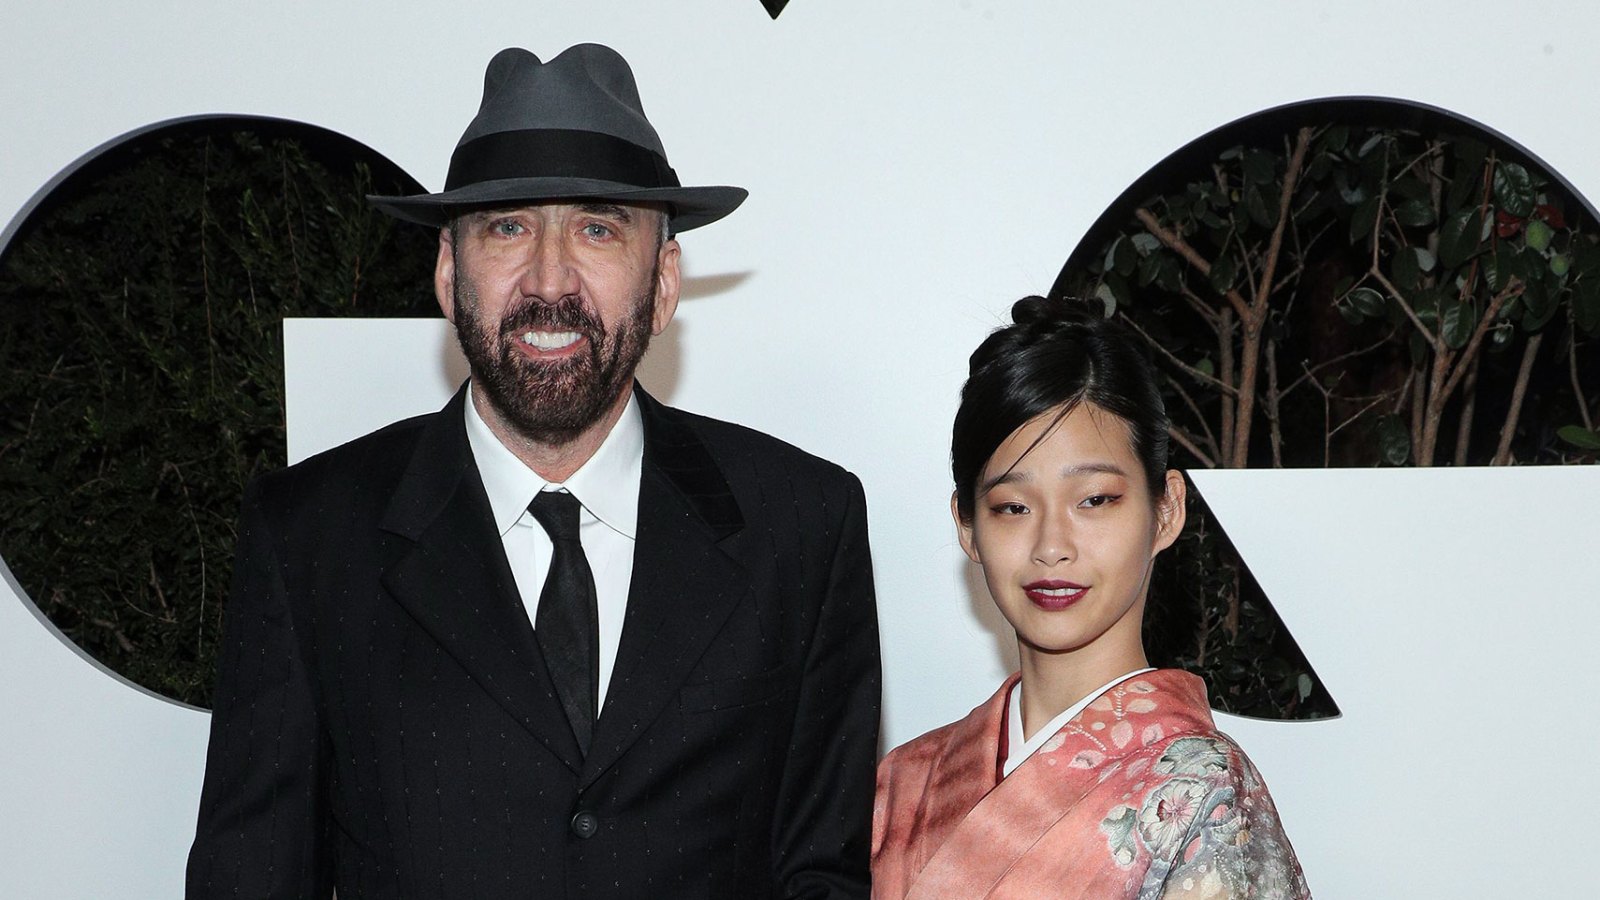 Nicolas Cage and Riko Shibata Welcome Their 1st Baby Together His 3rd